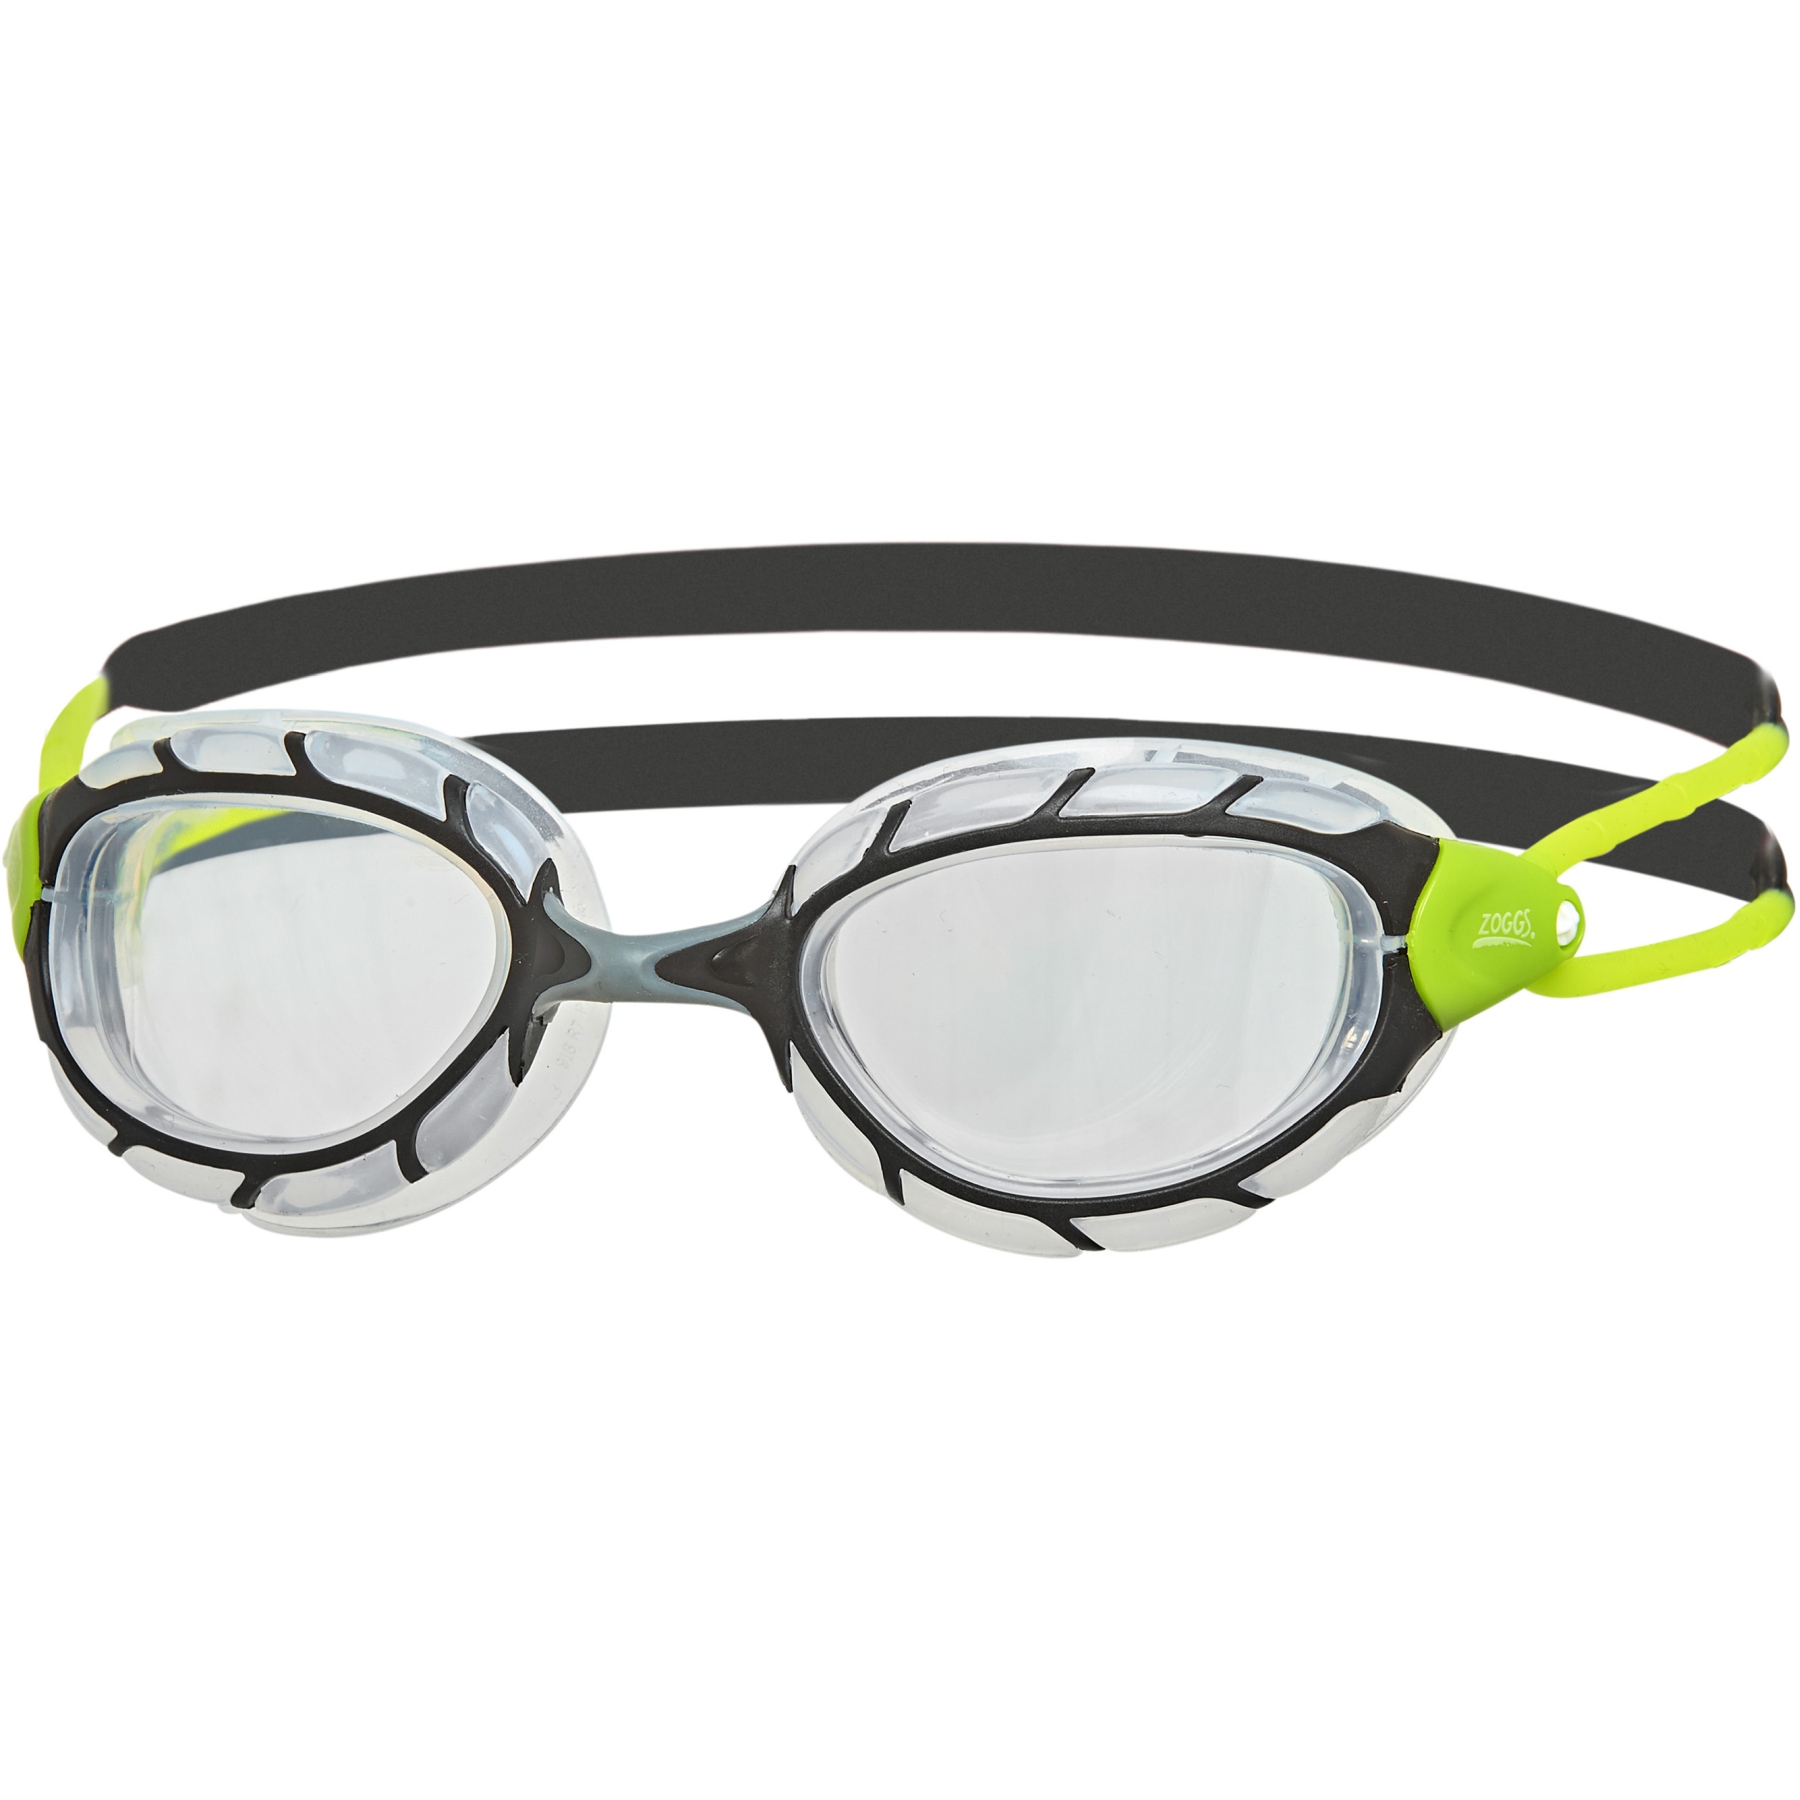 Productfoto van Zoggs Predator Swimming Goggles - Clear Lenses - Small Fit - green/clear